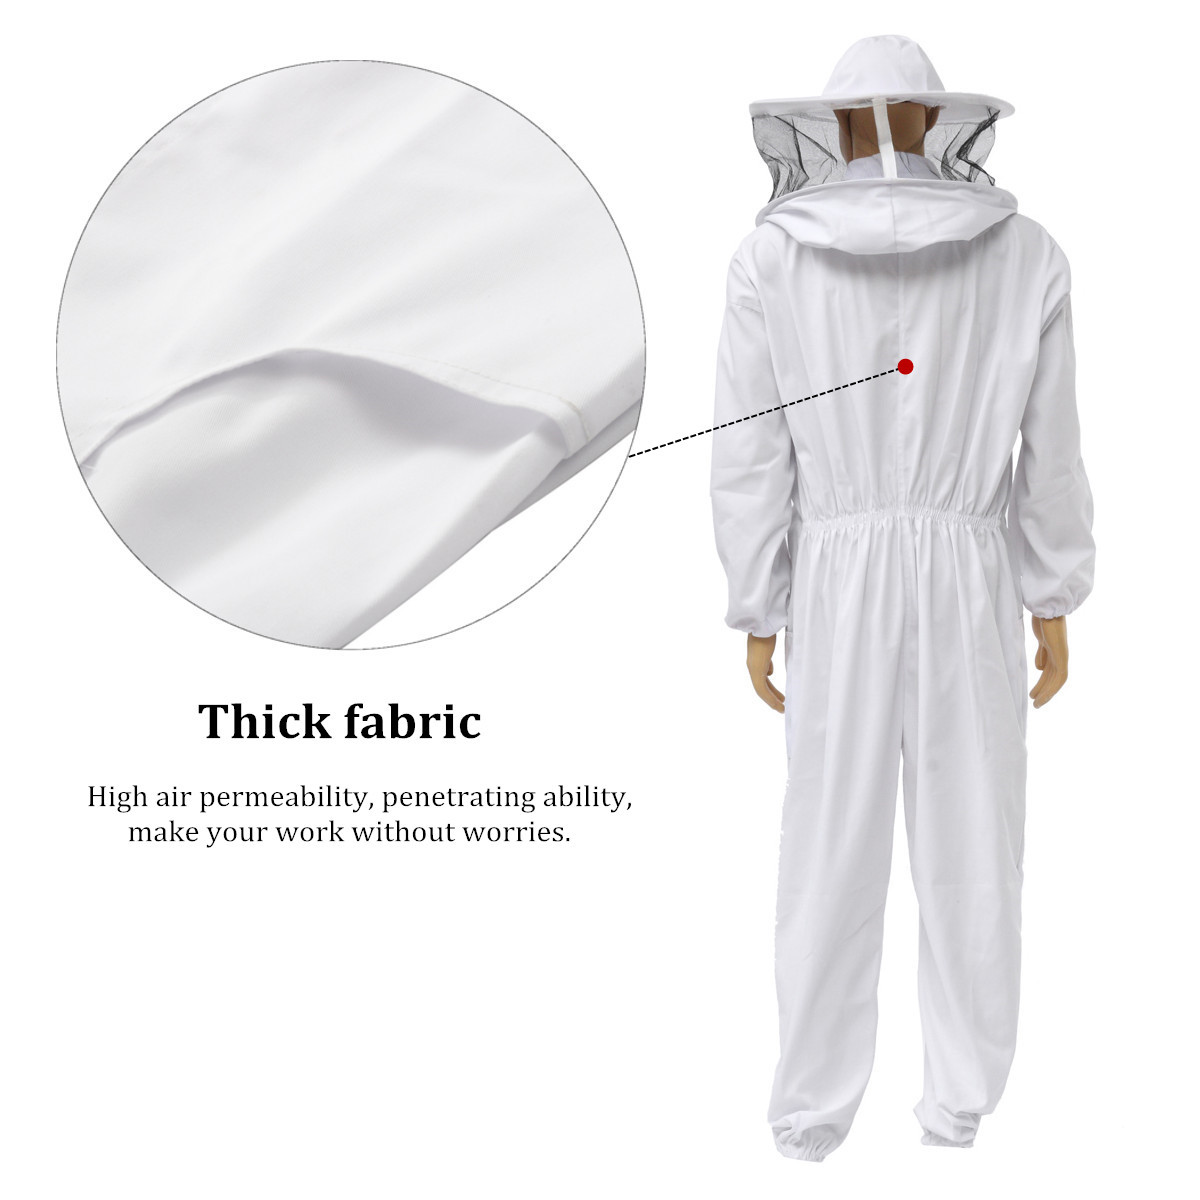 Beekeepers-Bee-Keeping-Cotton-Full-Protector-Suit-With-Veil-Hat-Hood-Bee-Suit-XL-XXL-XXL-1277290-6